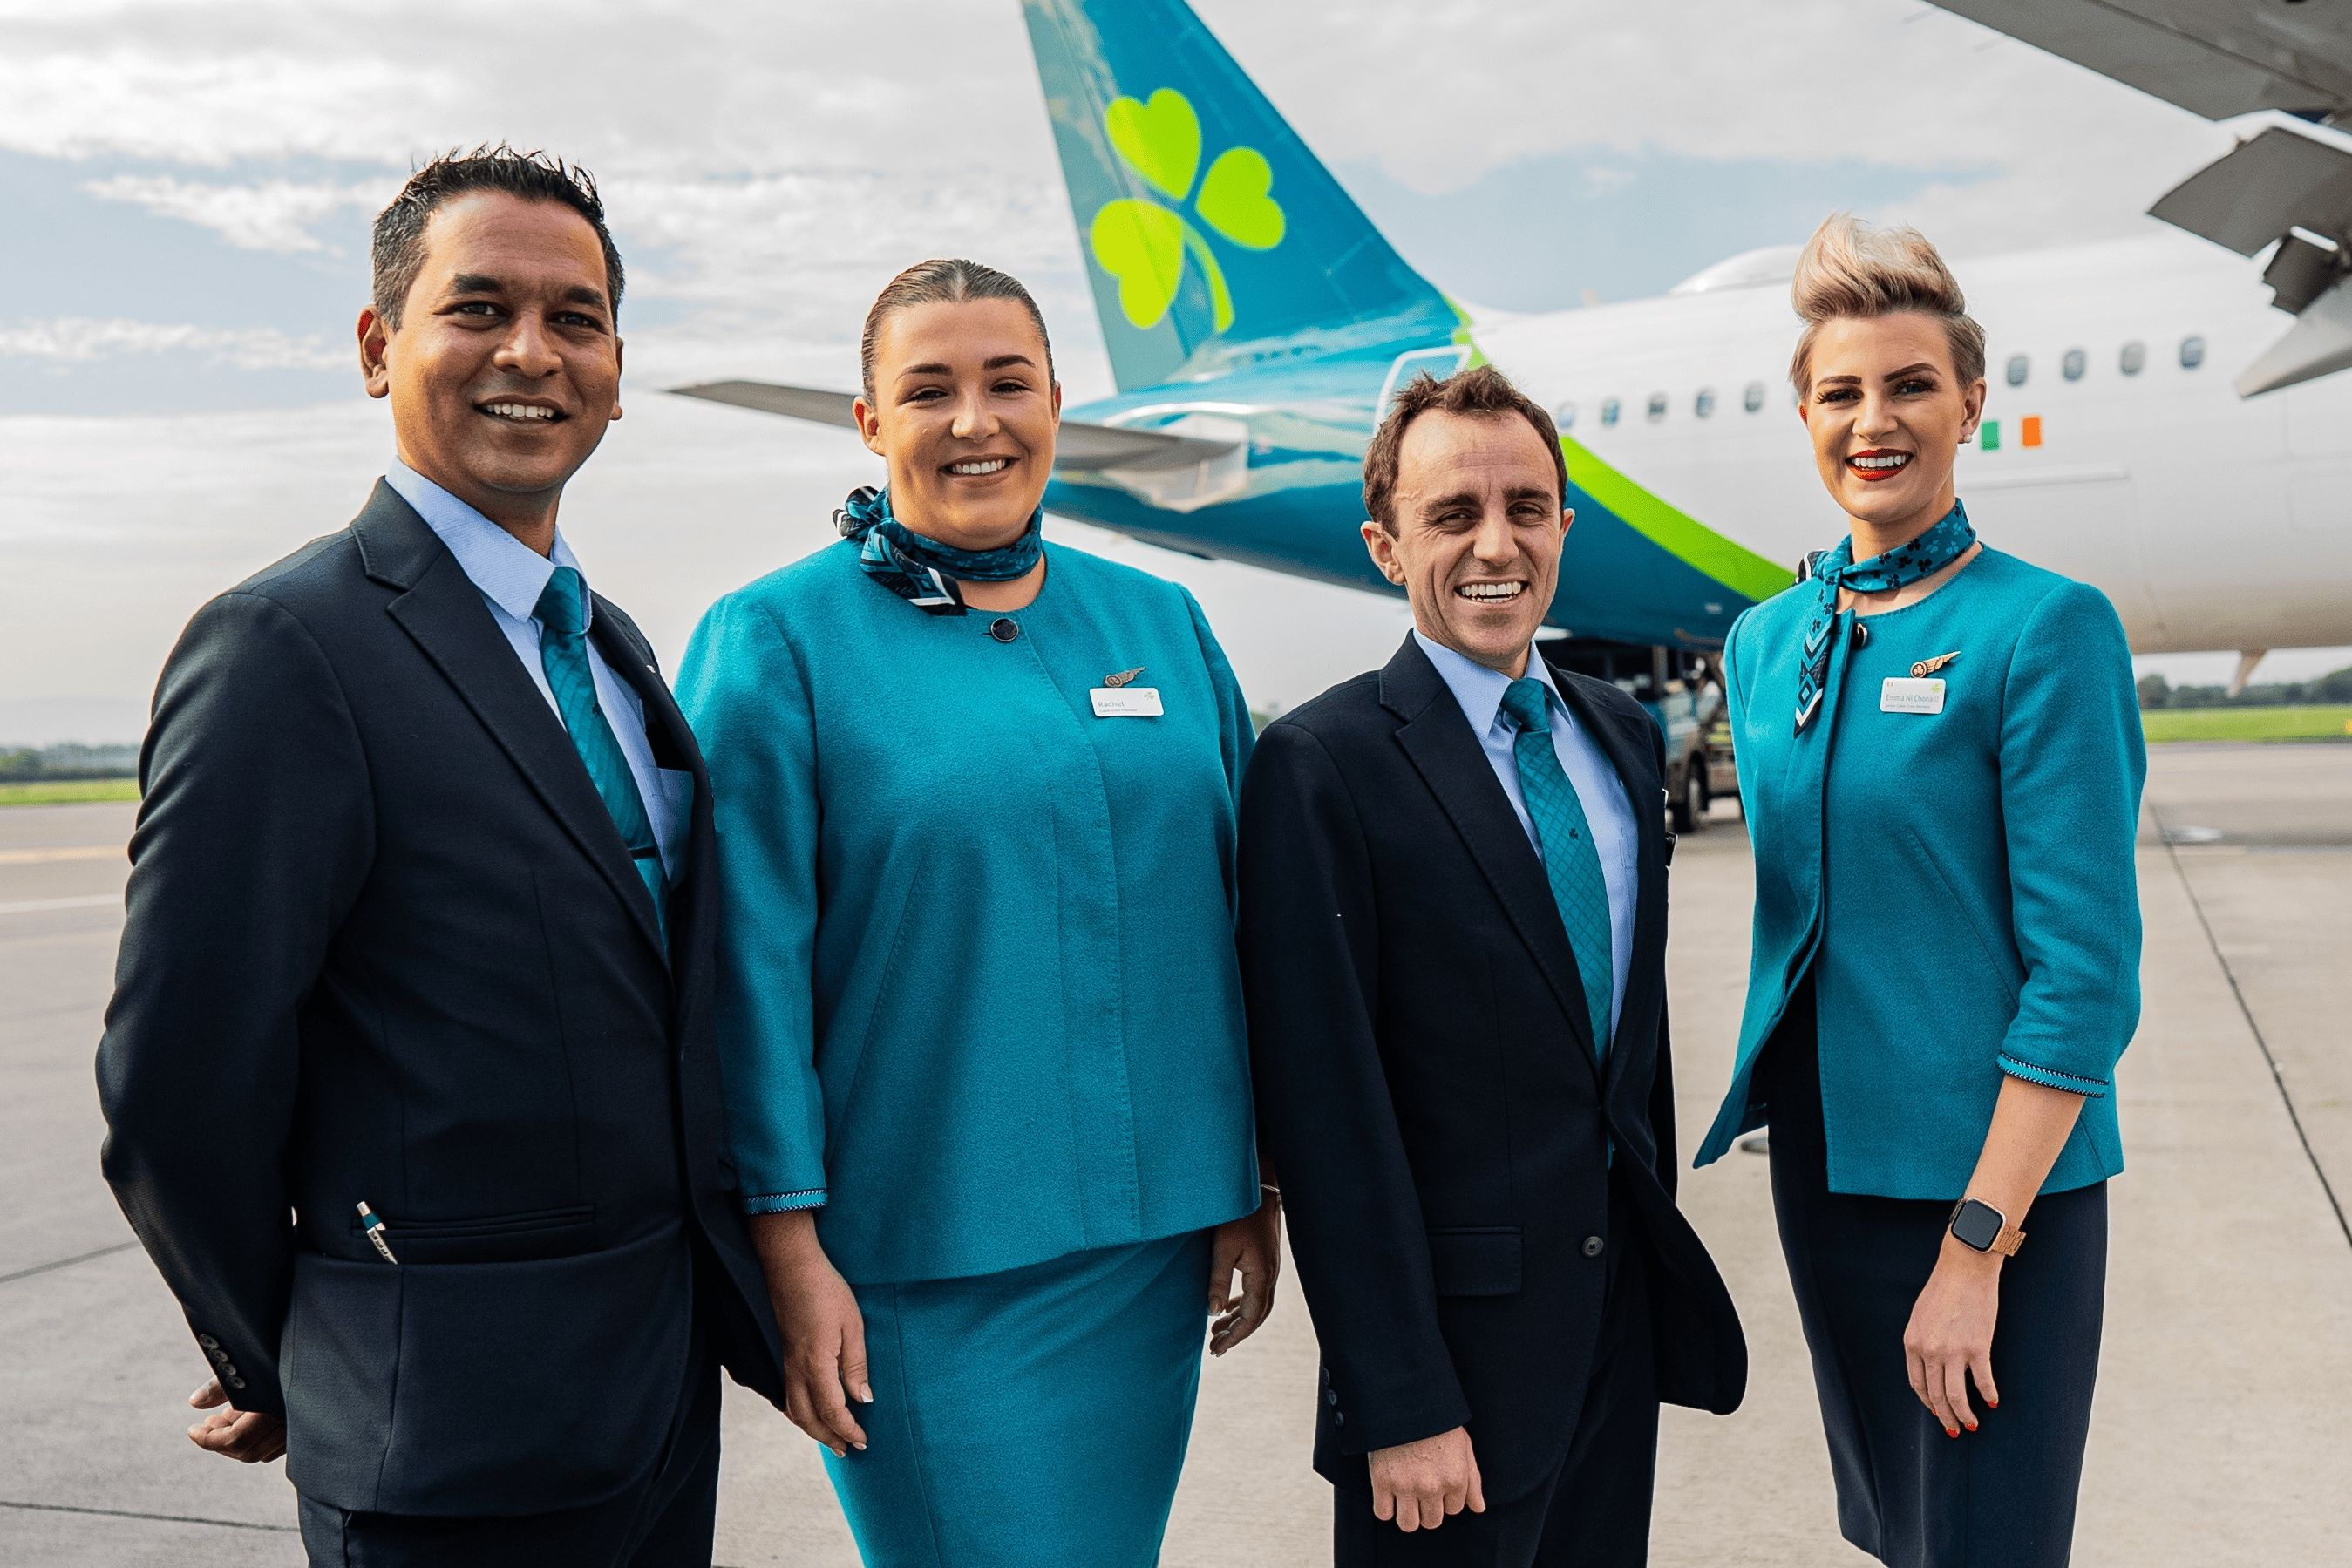 Aer Lingus is hiring 200 cabin crew – here are the salaries, perks and height restrictions